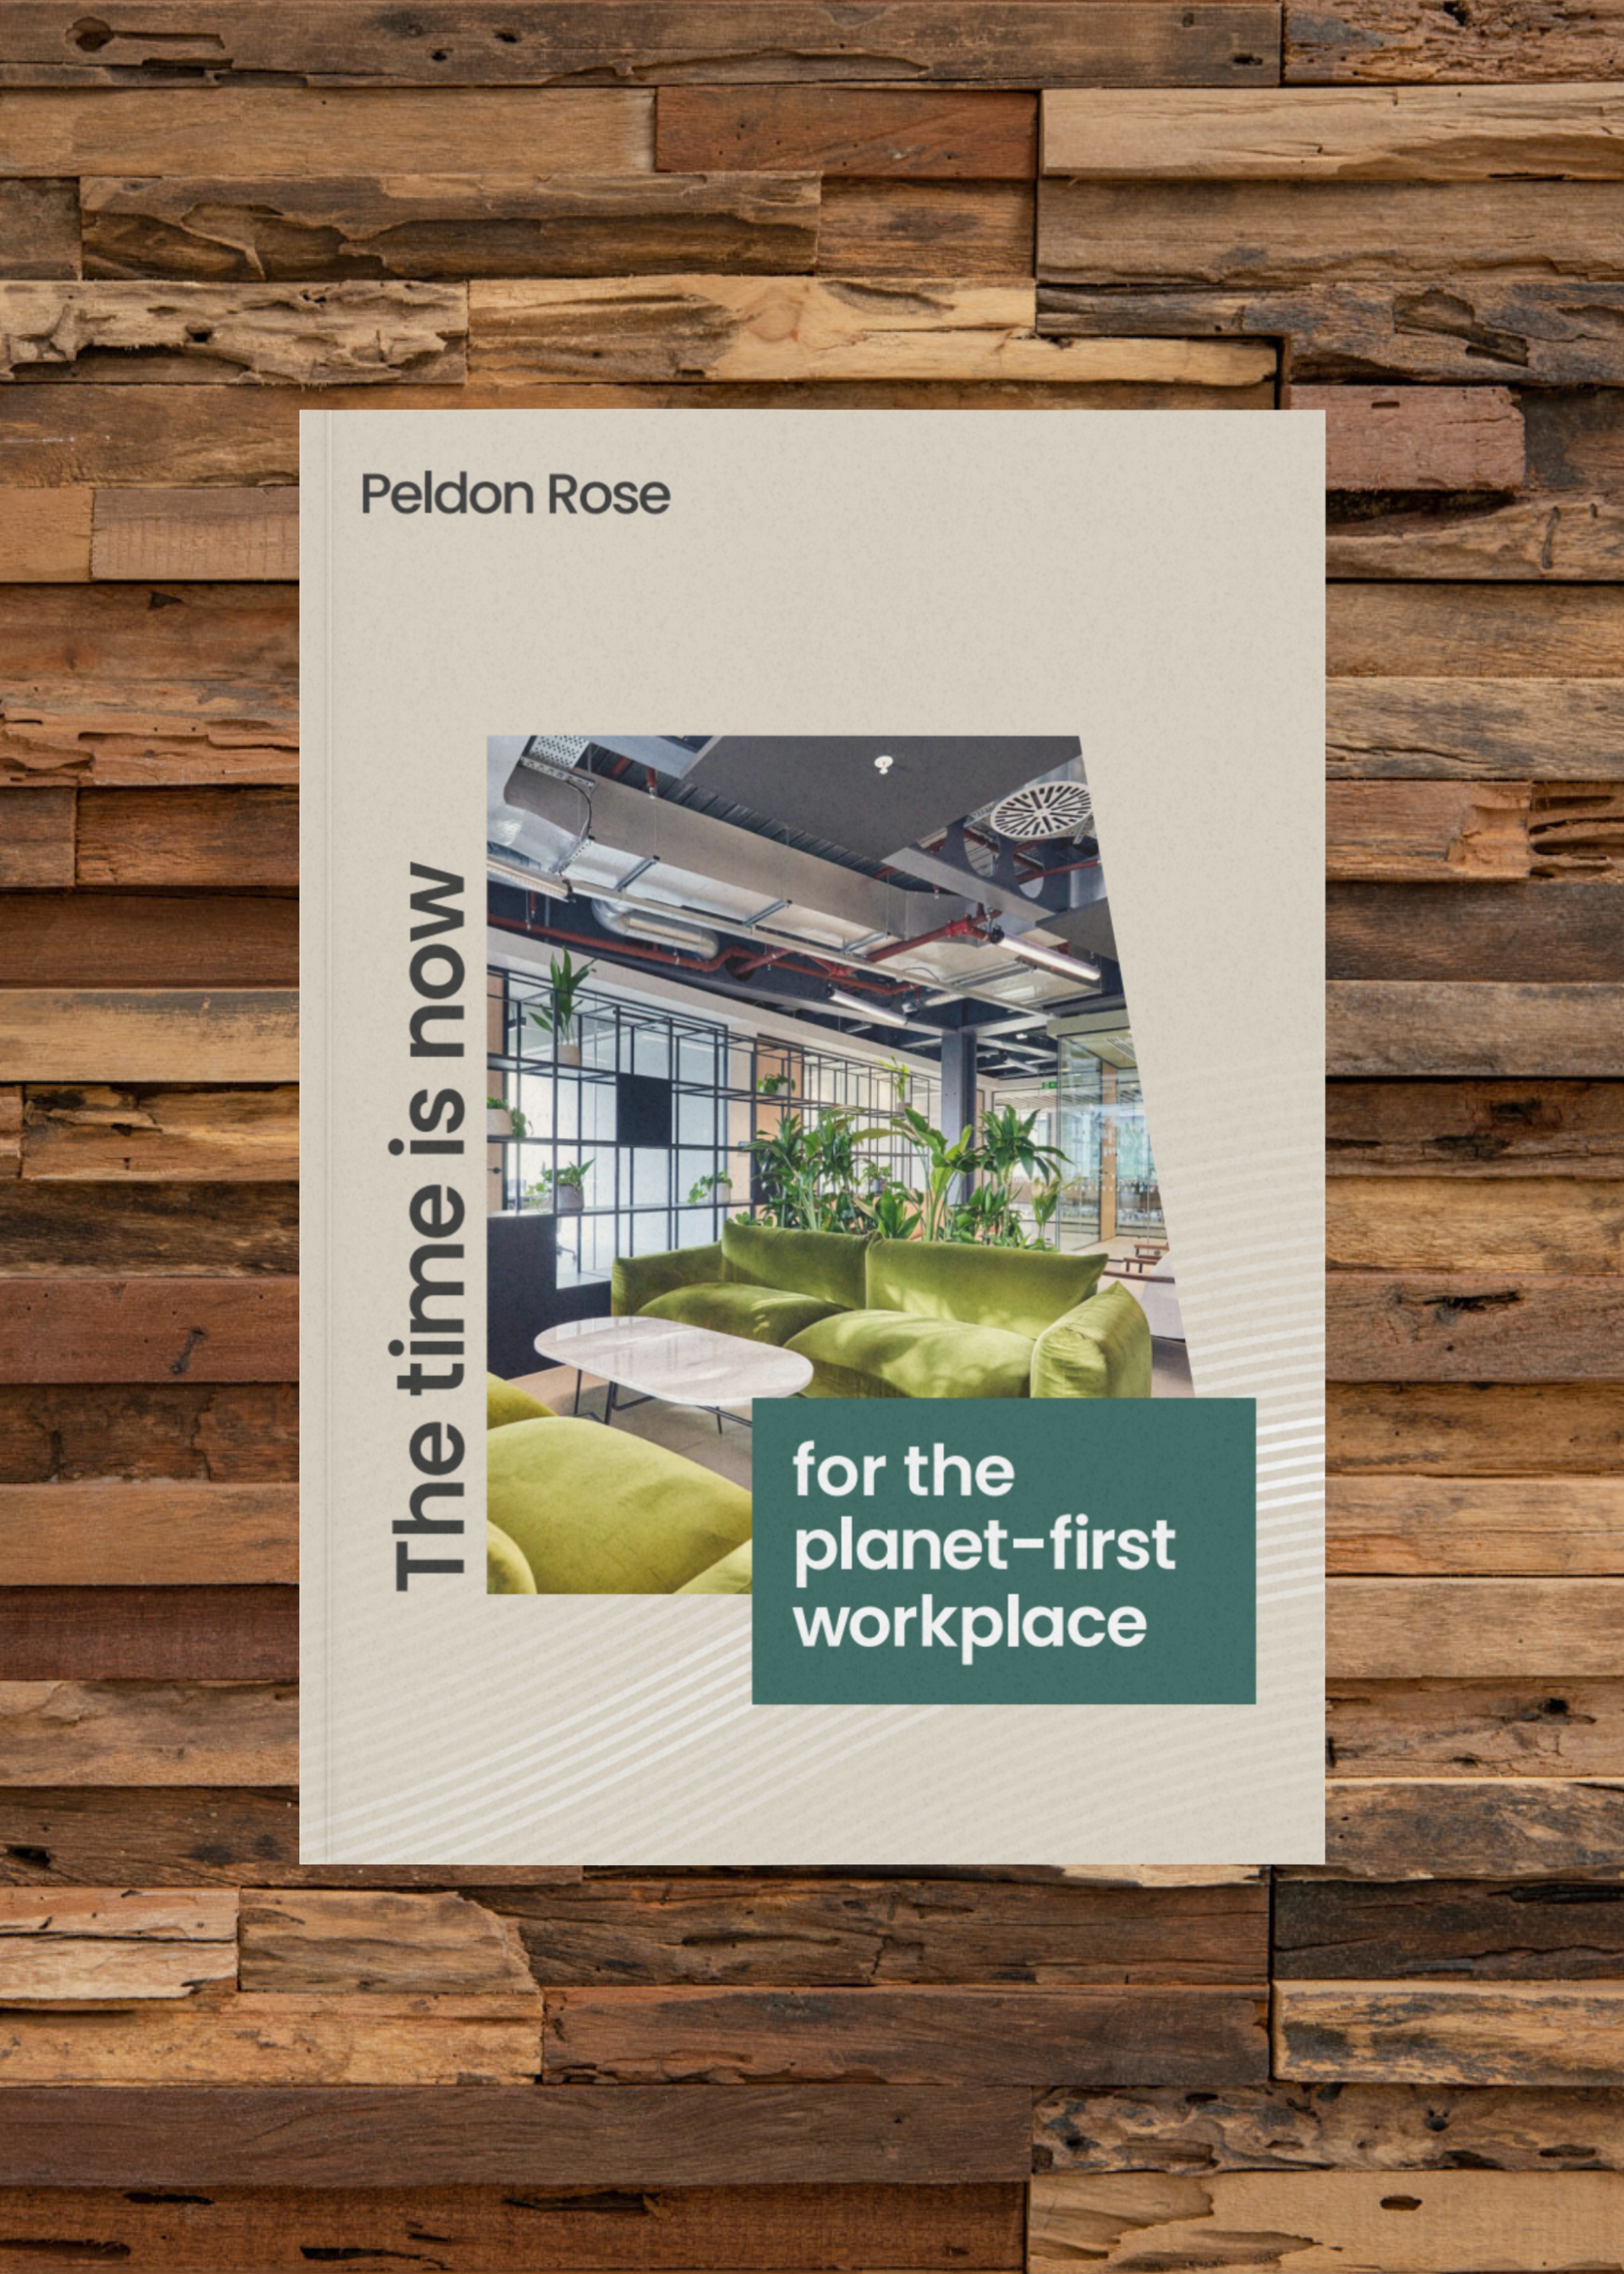 A guide to a planet-first workplace against a backdrop of wooden wall